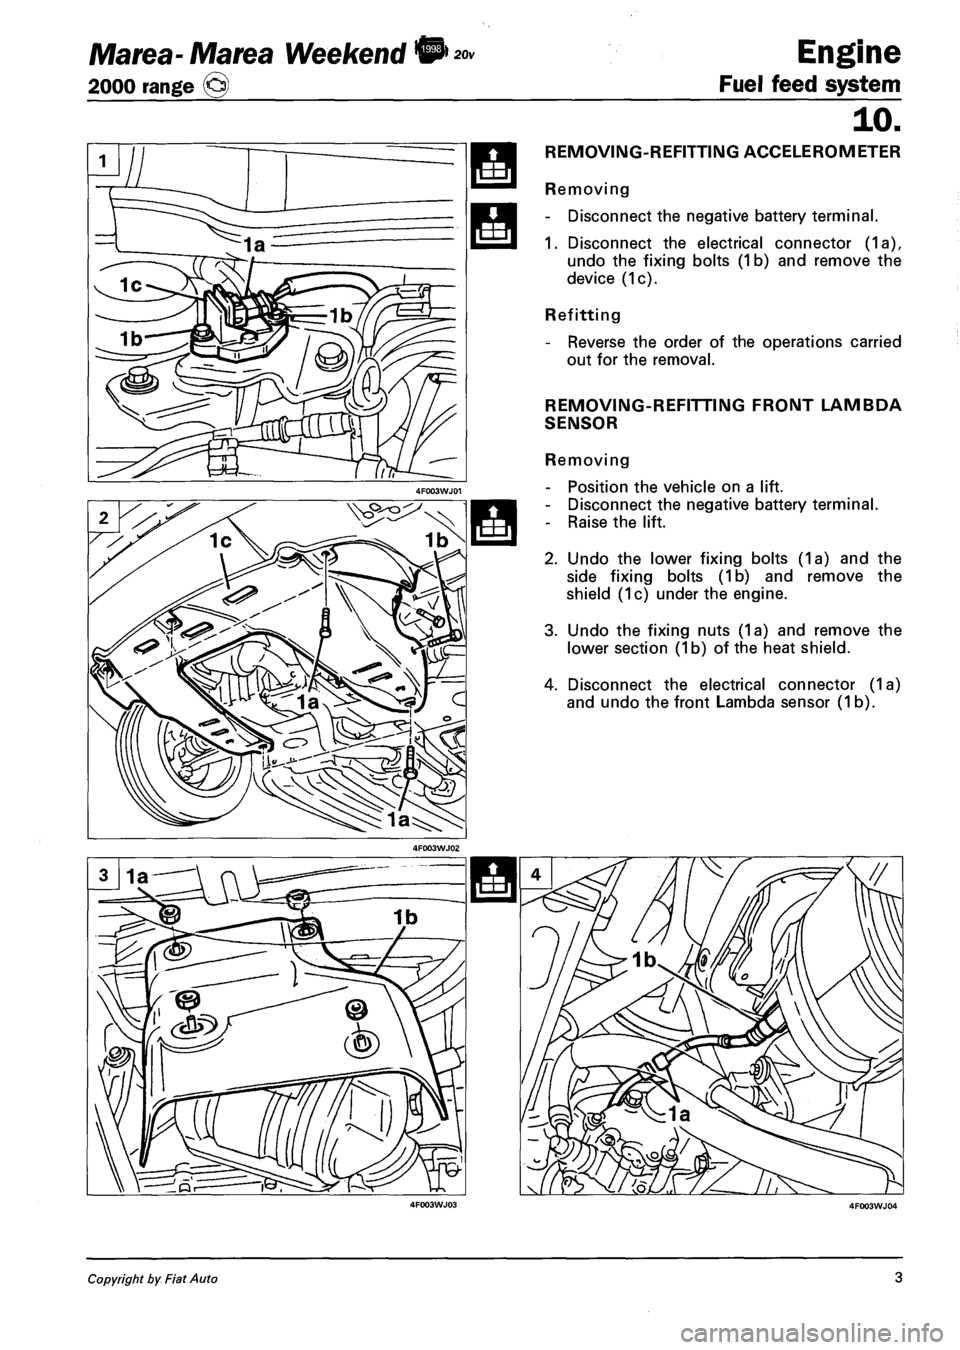 FIAT MAREA 2000 1.G Workshop Manual Marea- Marea Weekend • 
2000 range © 
Engine 
Fuel feed system 
10. 
REMOVING-REFITTING ACCELEROMETER 
Removing 
- Disconnect the negative battery terminal. 
1. Disconnect the electrical connector 